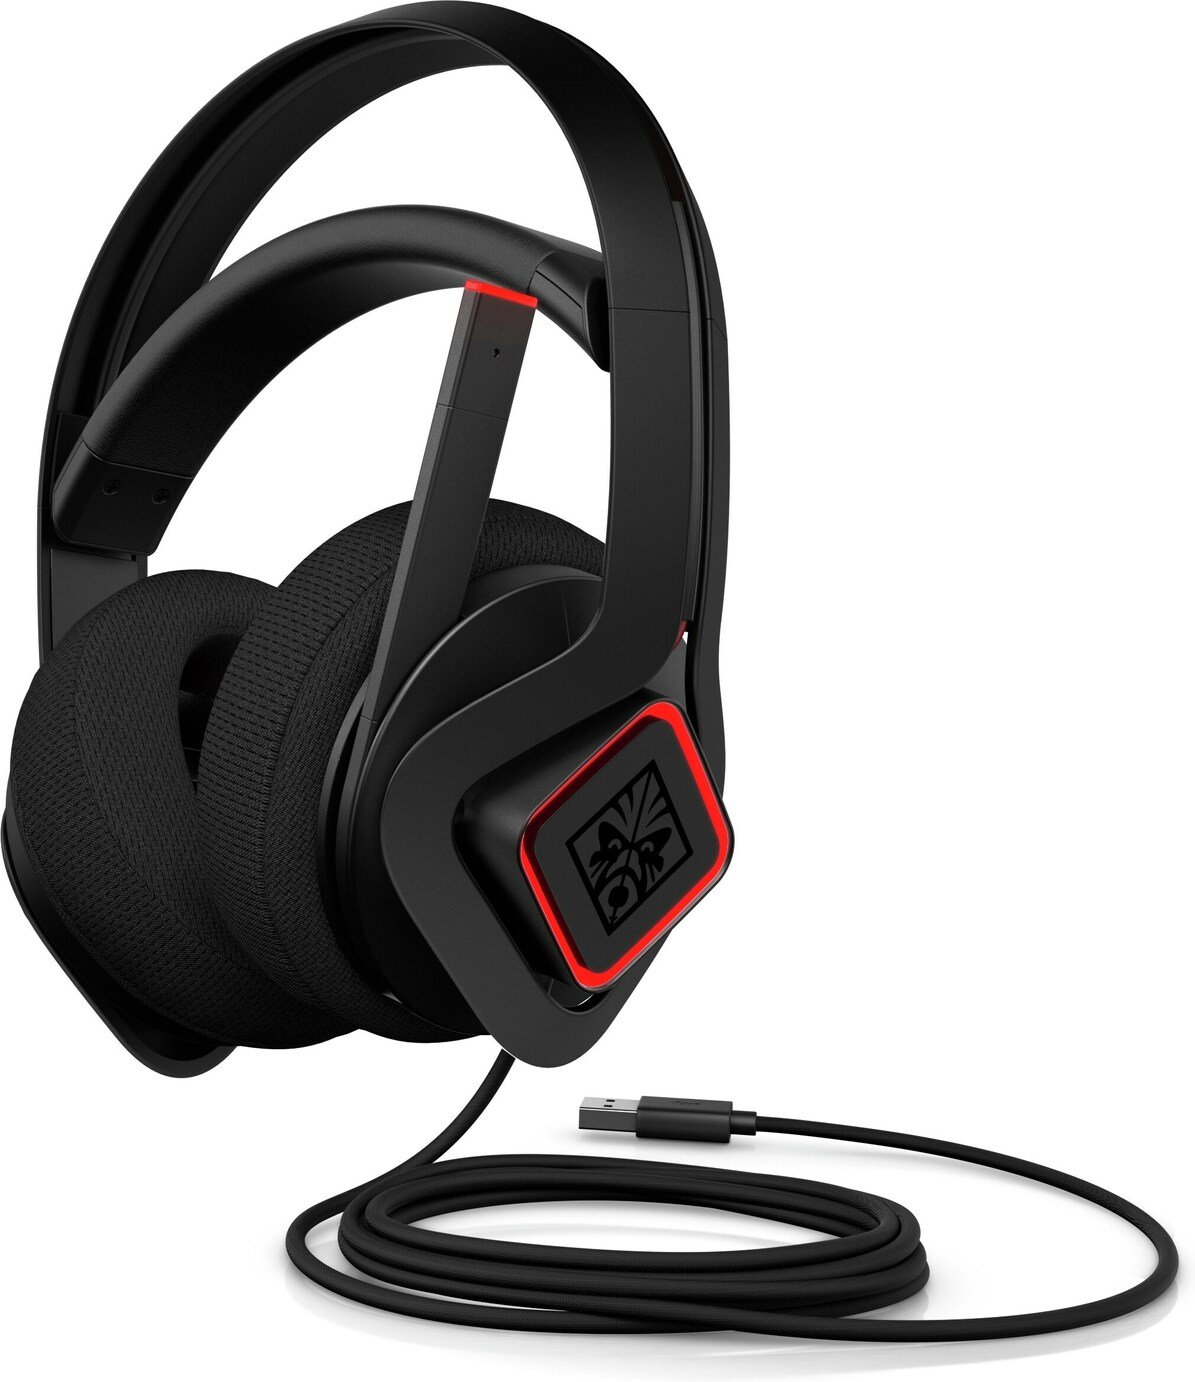 HP Omen Mindframe Prime Gaming Headset Review